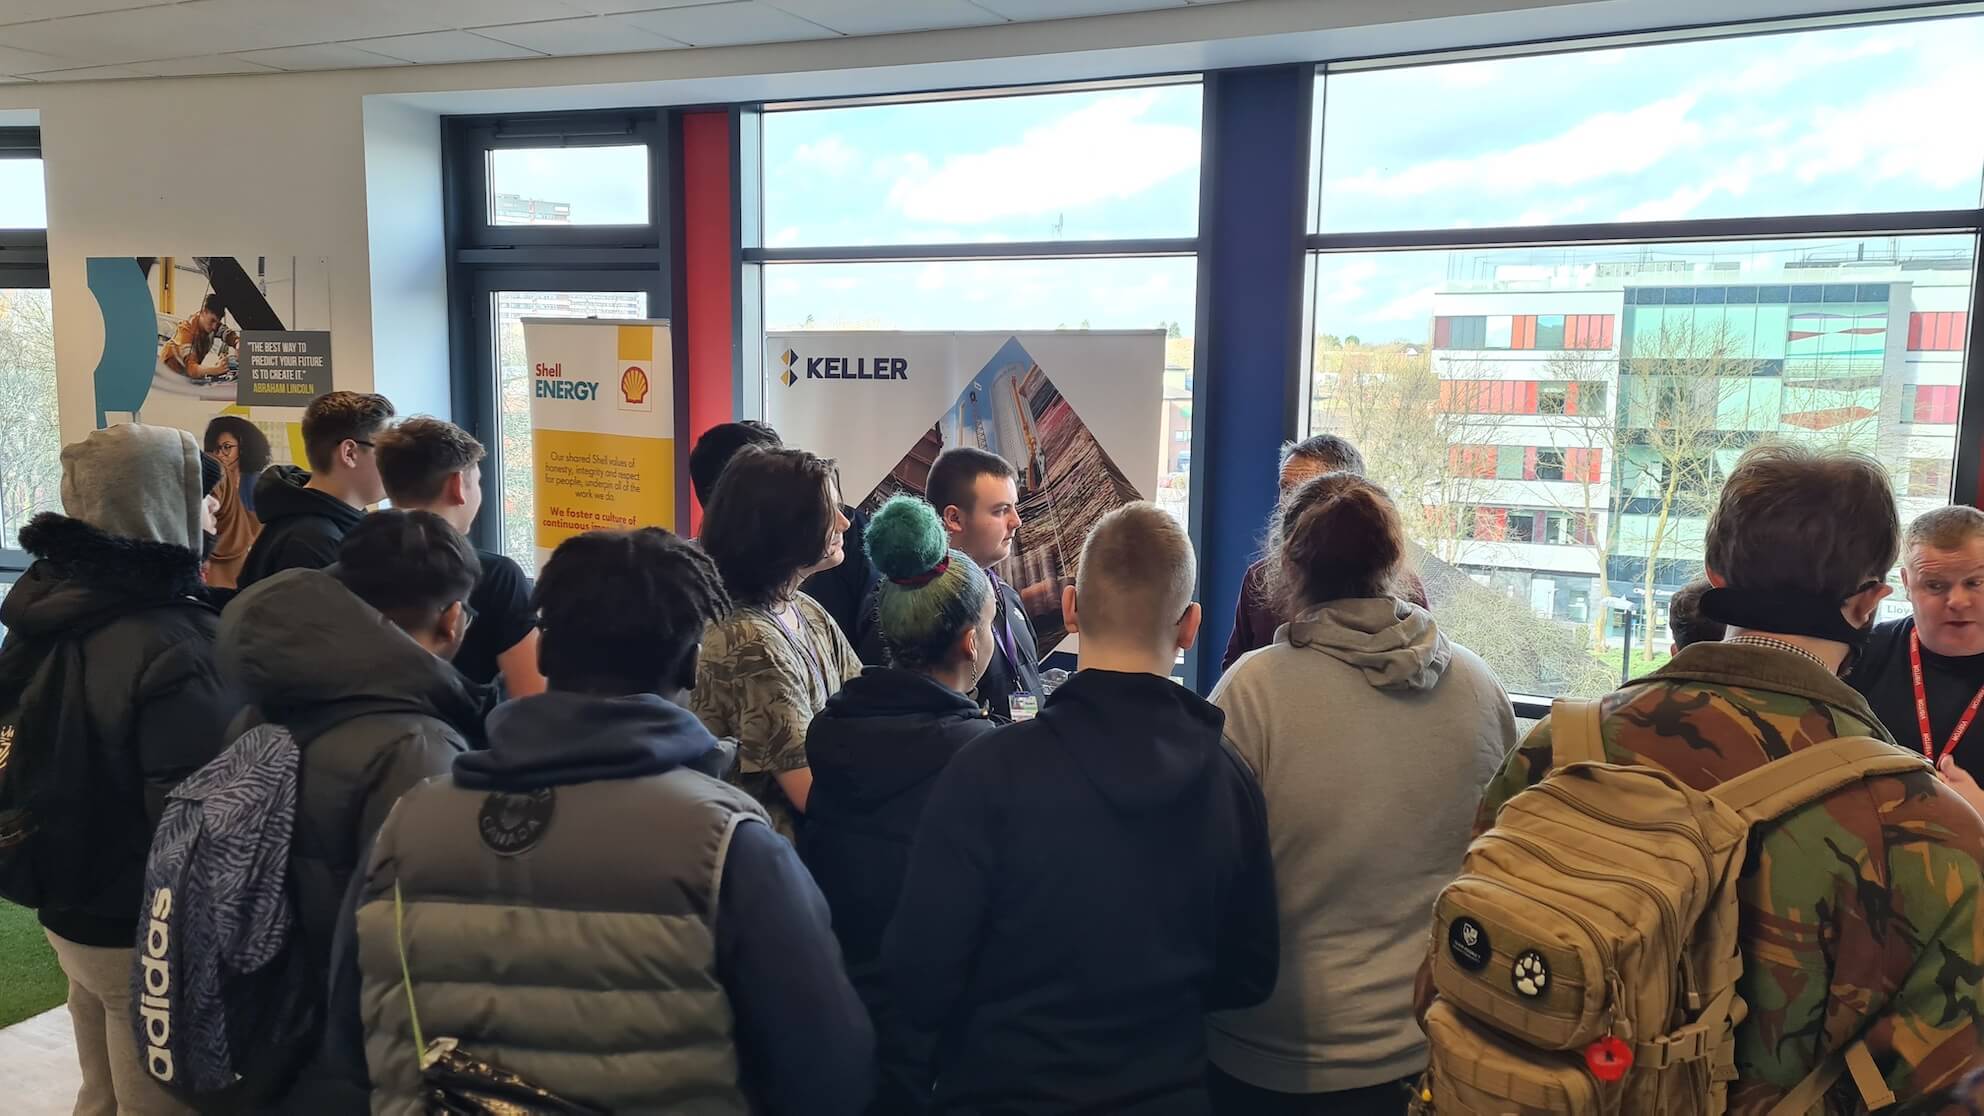 Learners speaking to employers at a motor vehicle careers fair